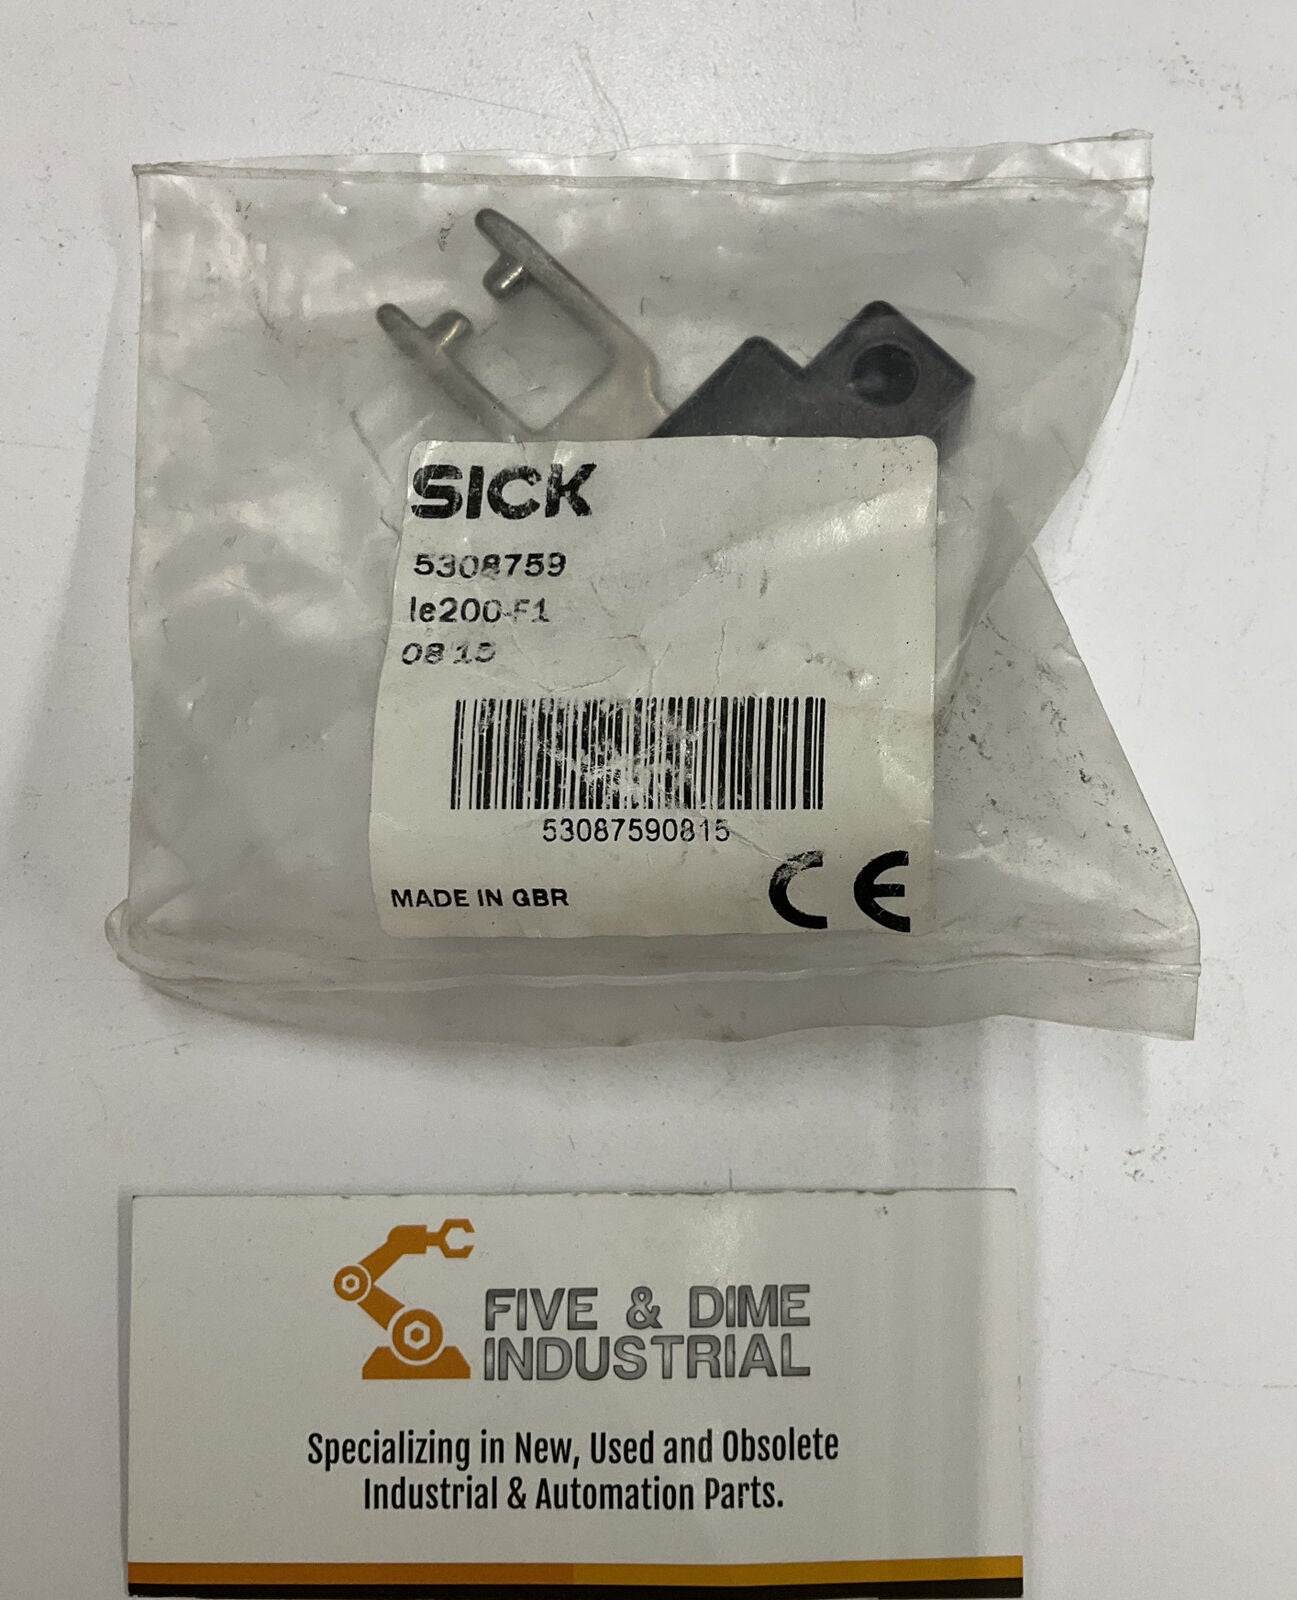 Sick 5308759 IE200-F1 Safety Switch Actuator (RE125)